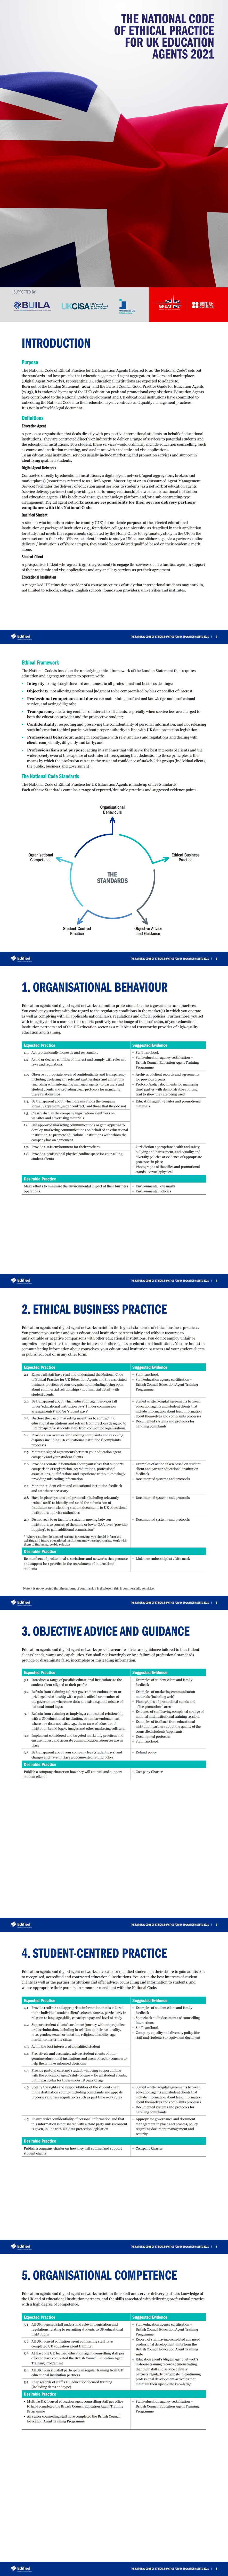 National Code of Ethical Practice for UK Education Agents 2021_00.jpg